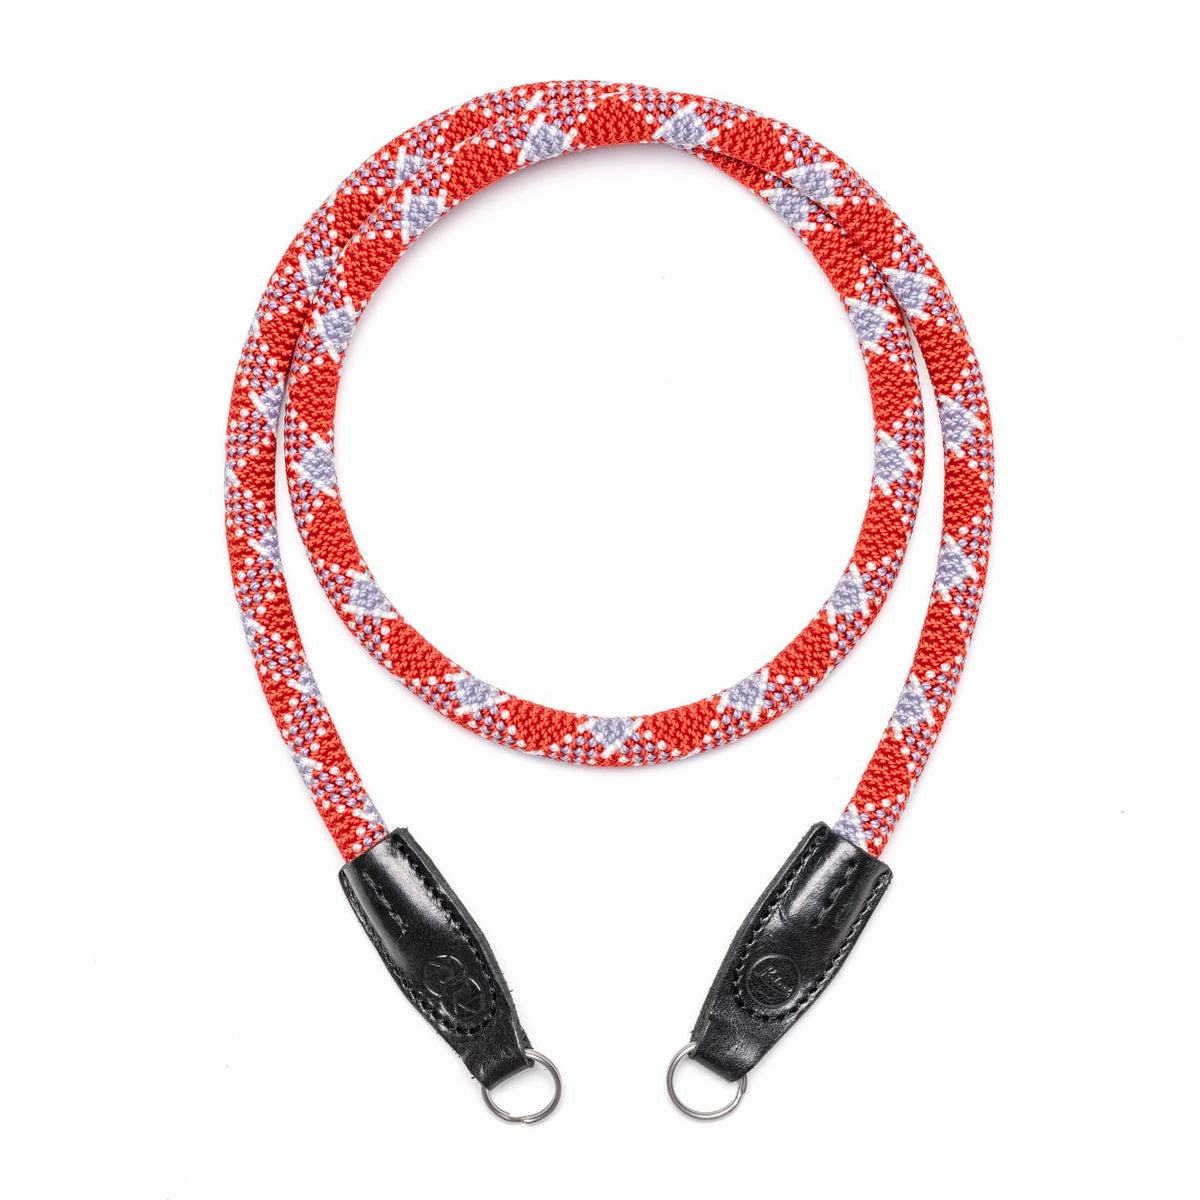 Leica Rope Strap - Red check | COOPH - Wake Concept Store  